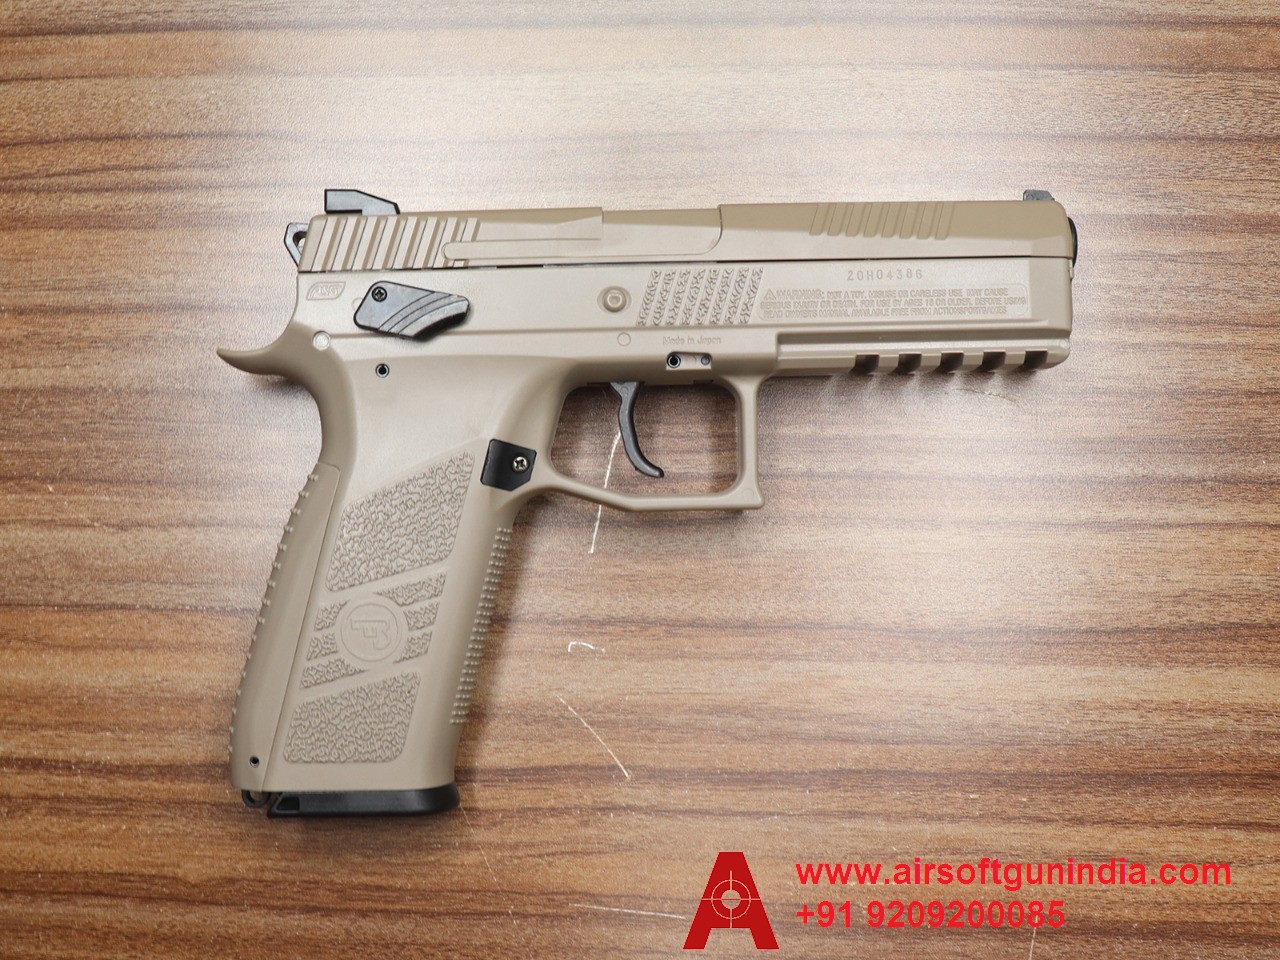 ASG CZ P-09 DT Co2 BB And Pellet .177Cal, 4.5mm Air Pistol By Airsoft Gun India.